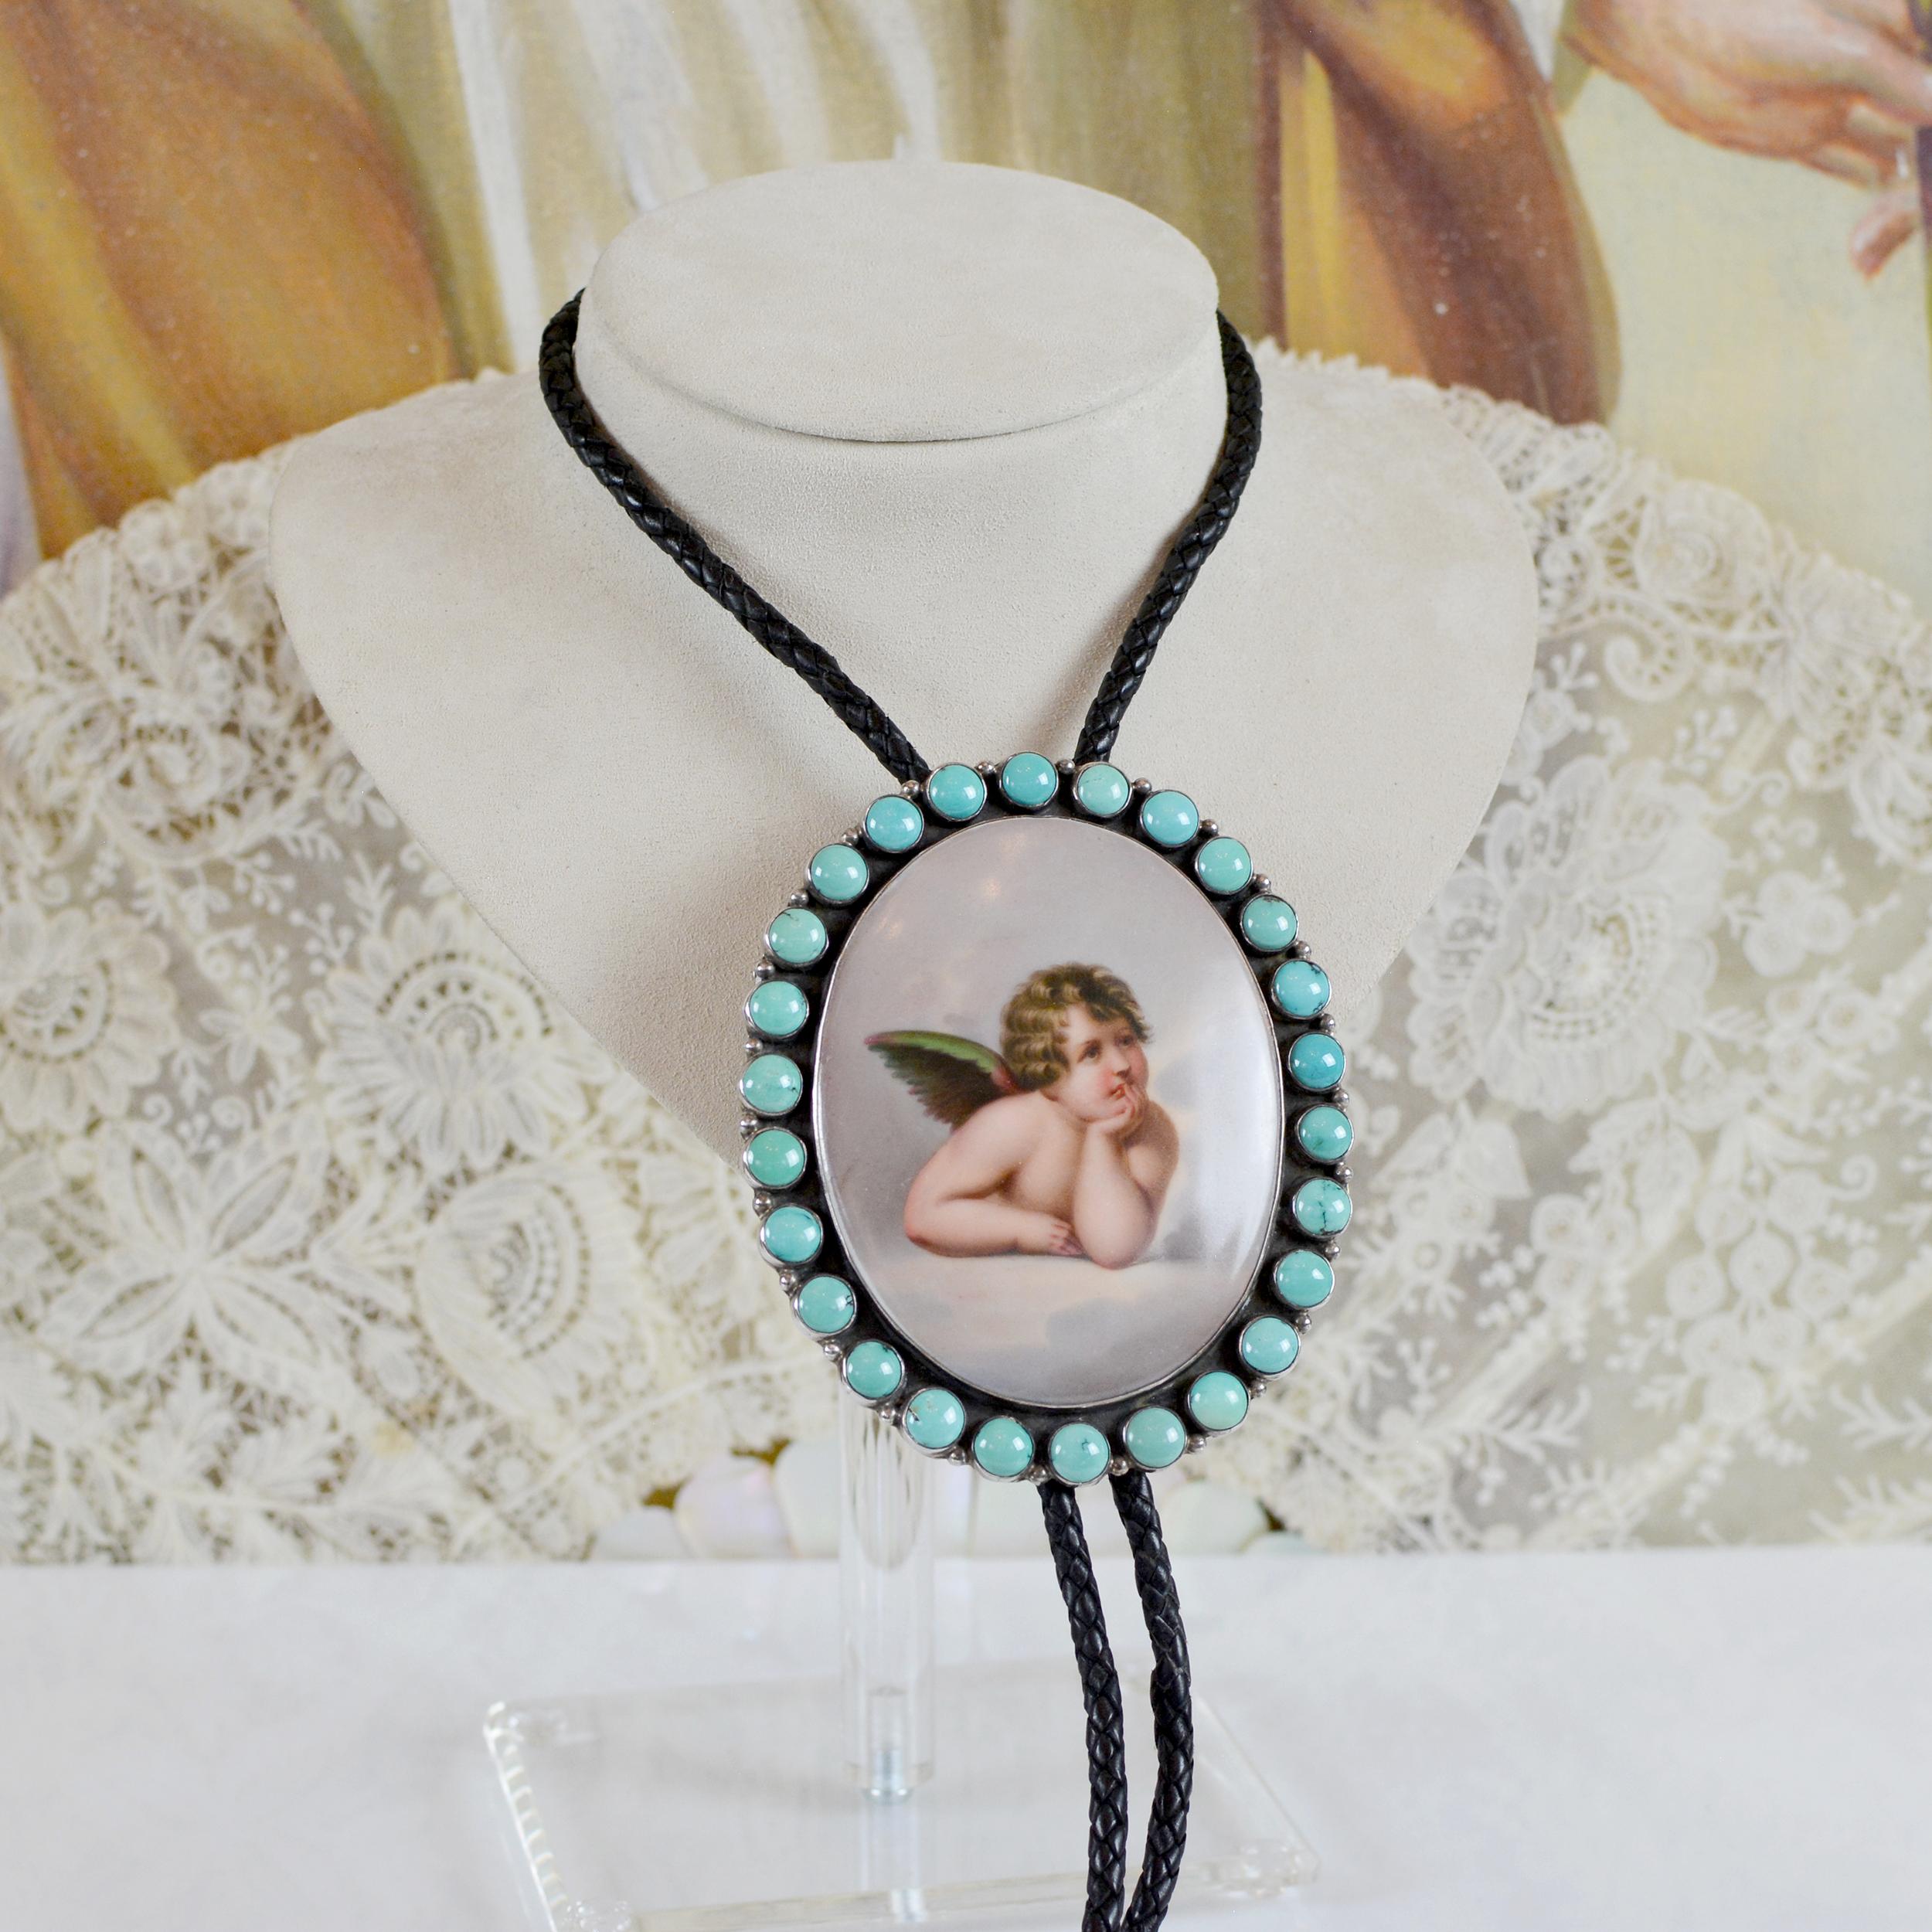 Jill Garber 19th Century Sistine Madonna Angel Portrait with Turquoise Bolo Tie  For Sale 1